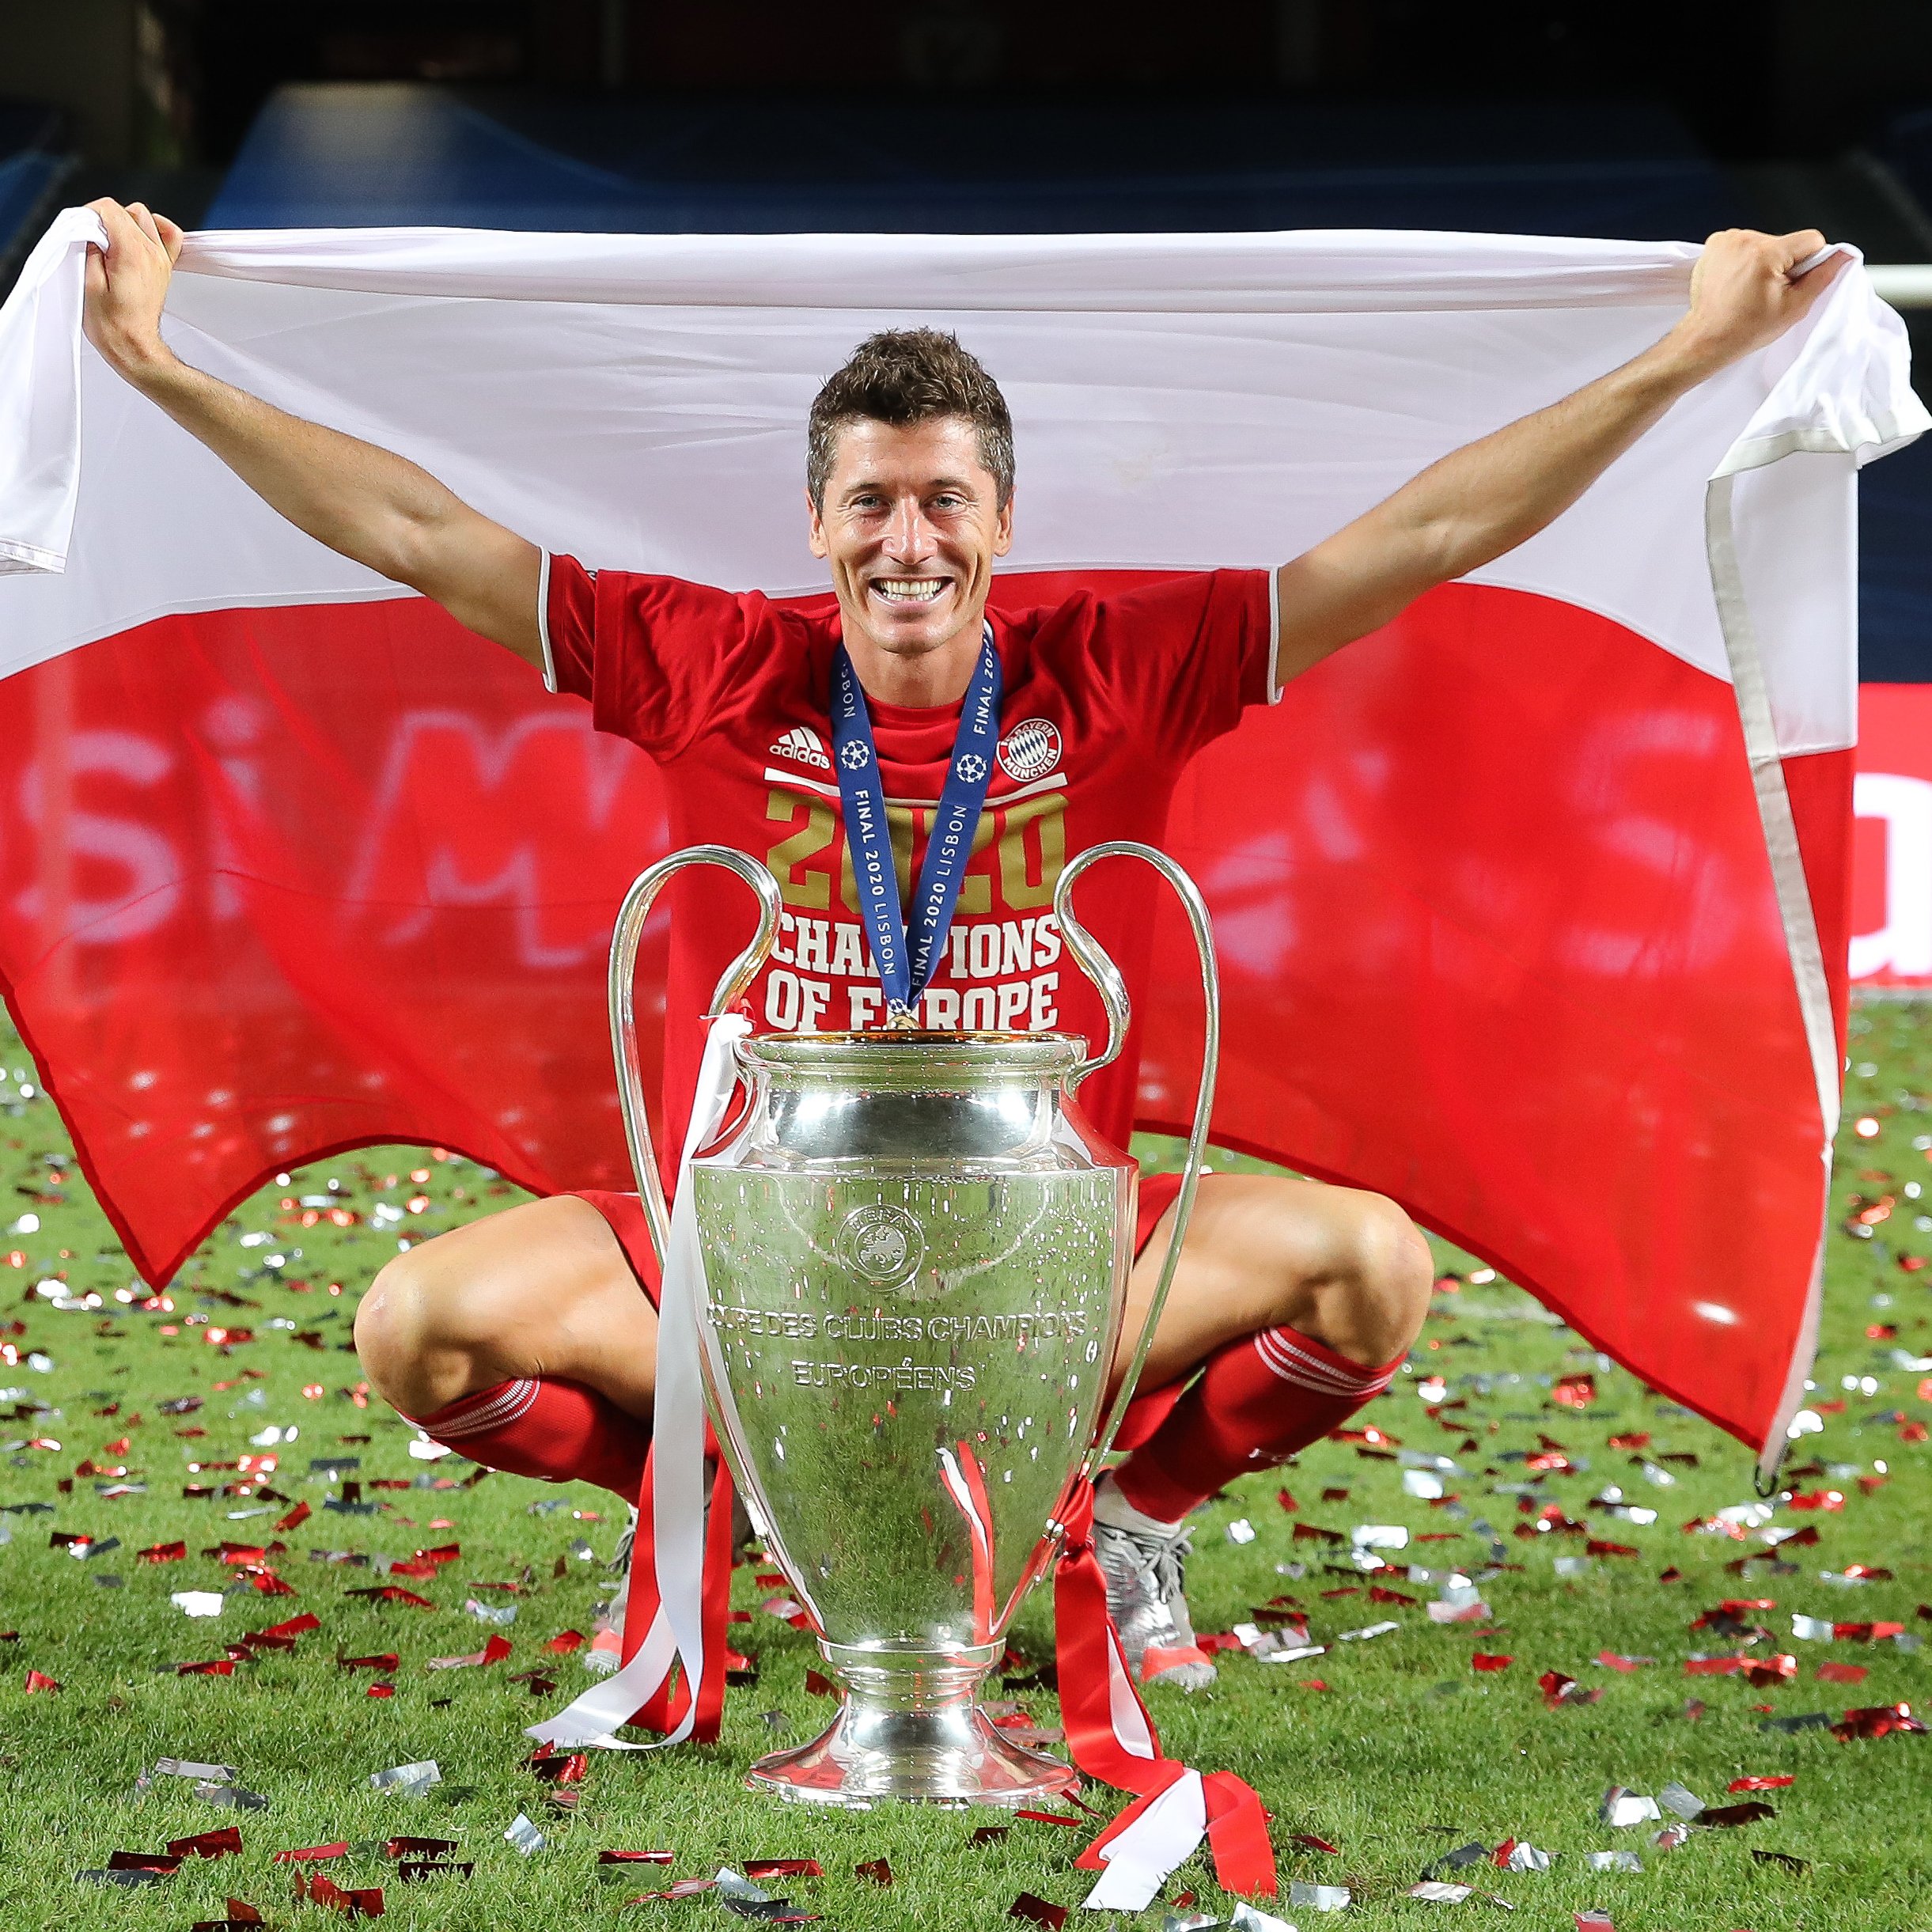 UEFA Champions League on X: "🇵🇱 Robert Lewandowski has finished as the  top scorer playing in Europe for club and country for the 3rd calendar year  running... 2⃣0⃣2⃣1⃣ = ⚽️6⃣9⃣ 2⃣0⃣2⃣0⃣ =